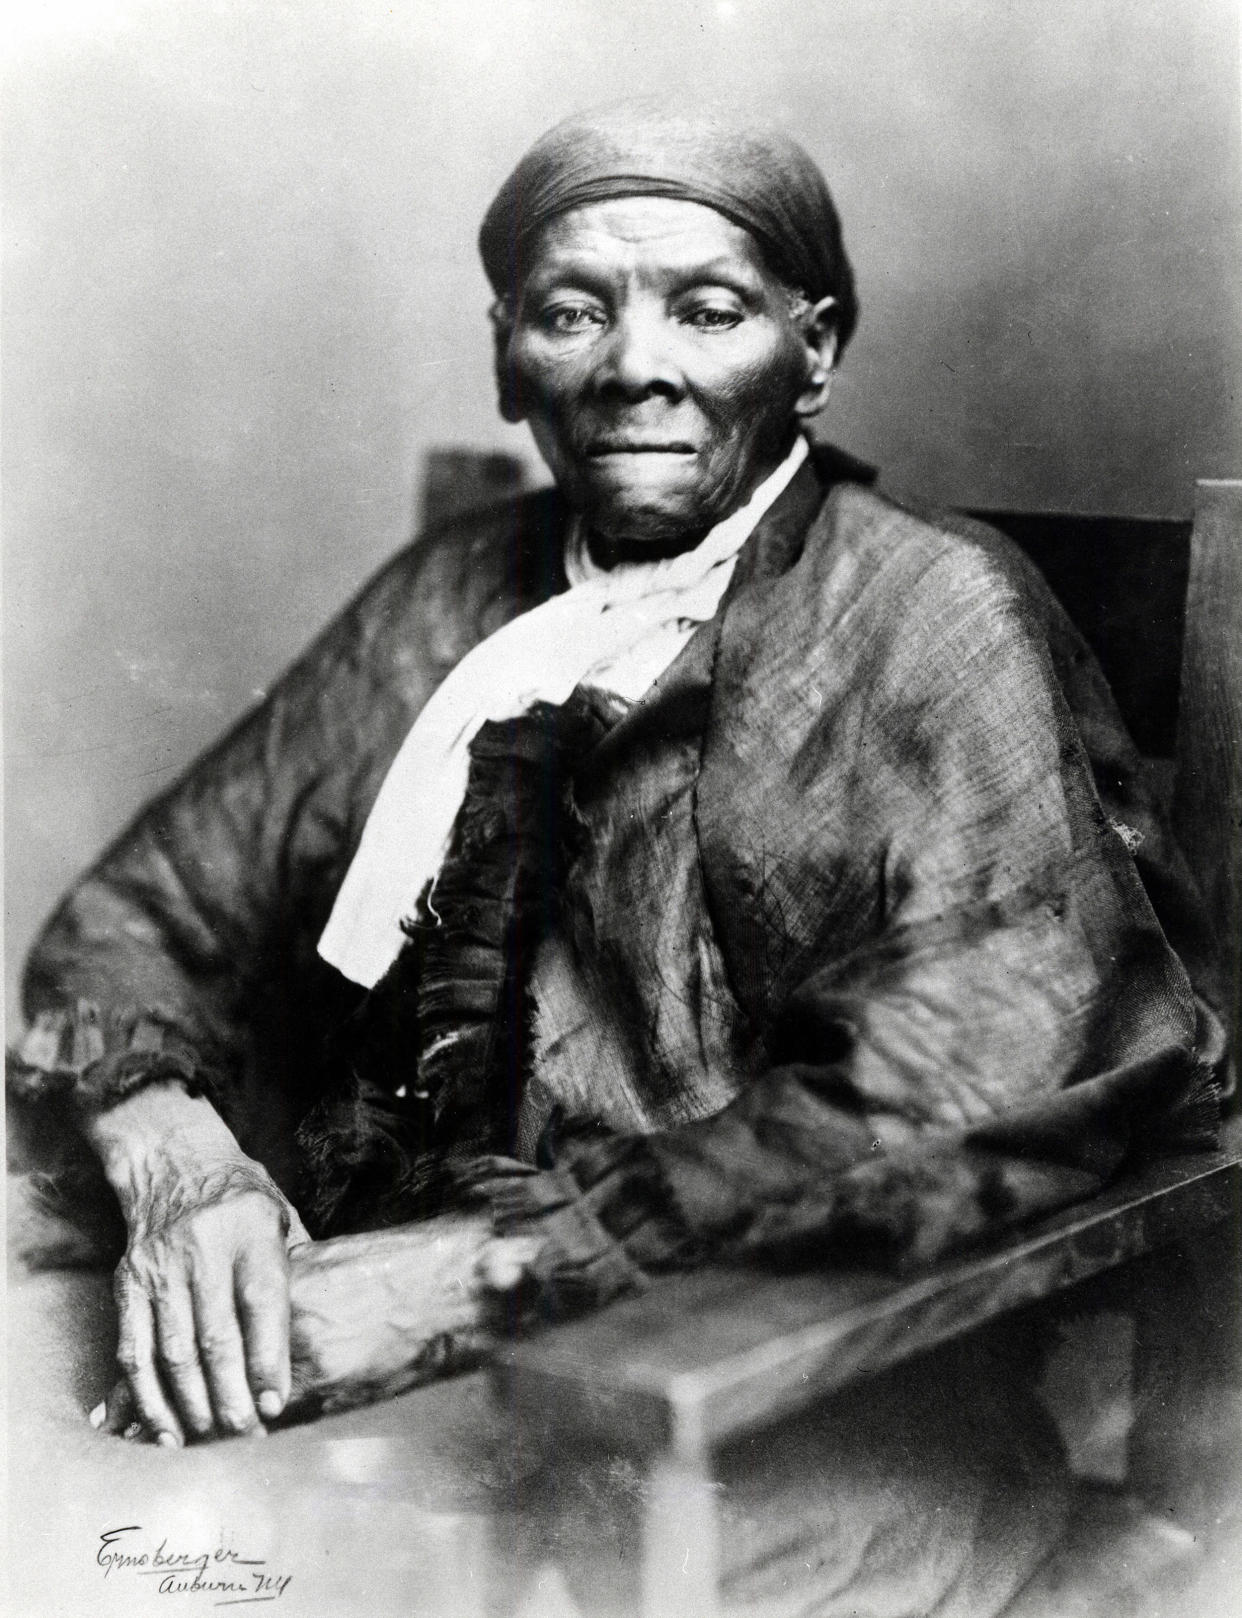 Image: Harriet Tubman. (UniversalImagesGroup / Getty Images)